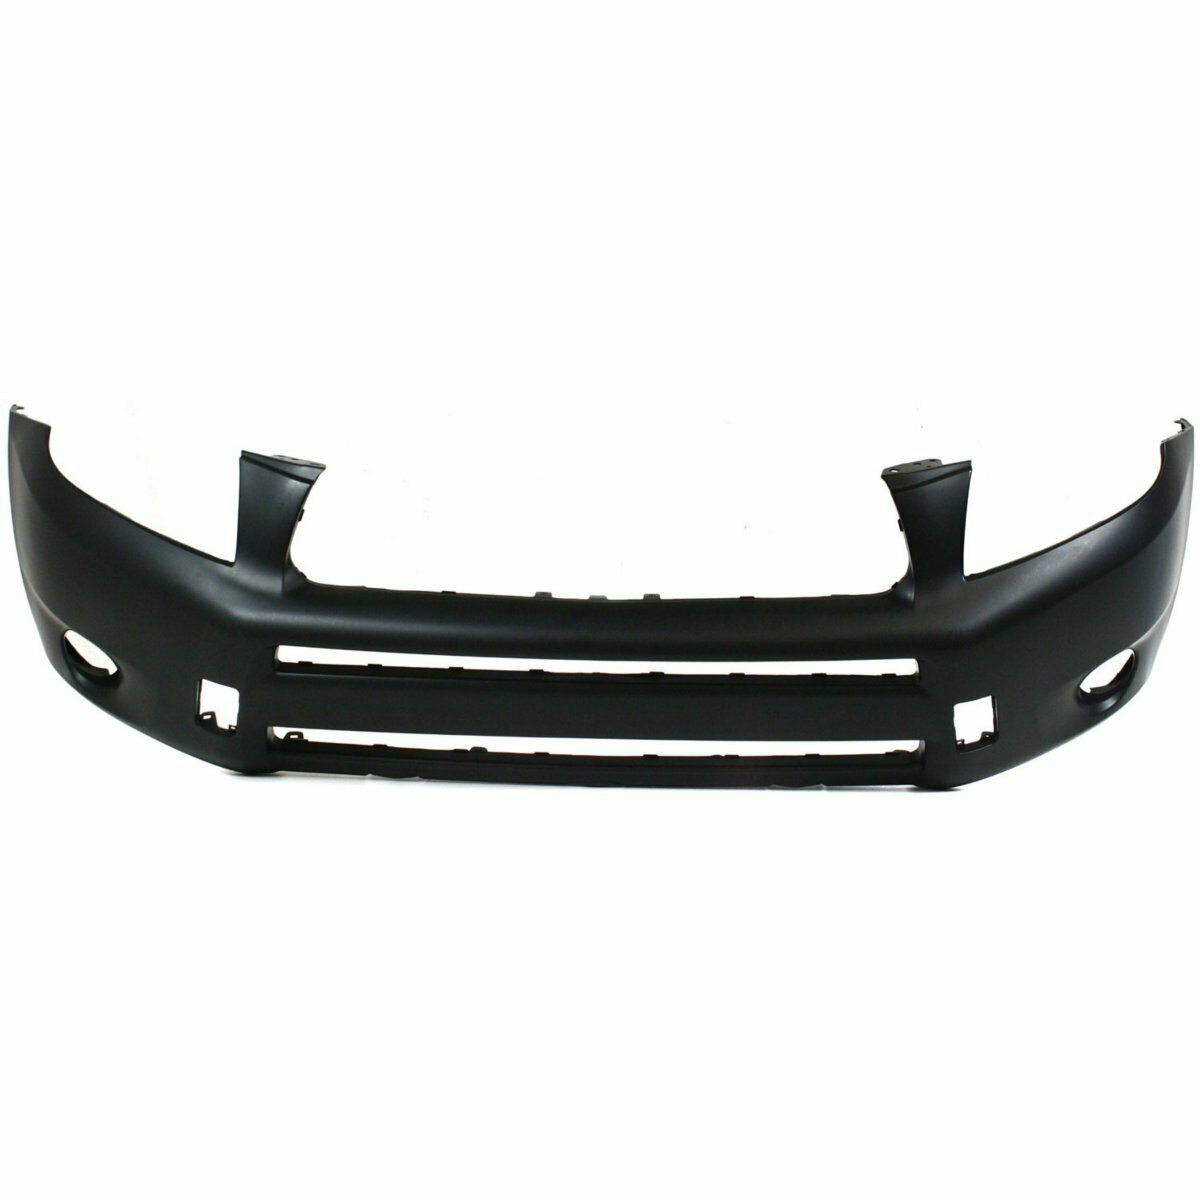 2006-2008 Toyota Rav4 Front Bumper w/o Flare holes Painted to Match